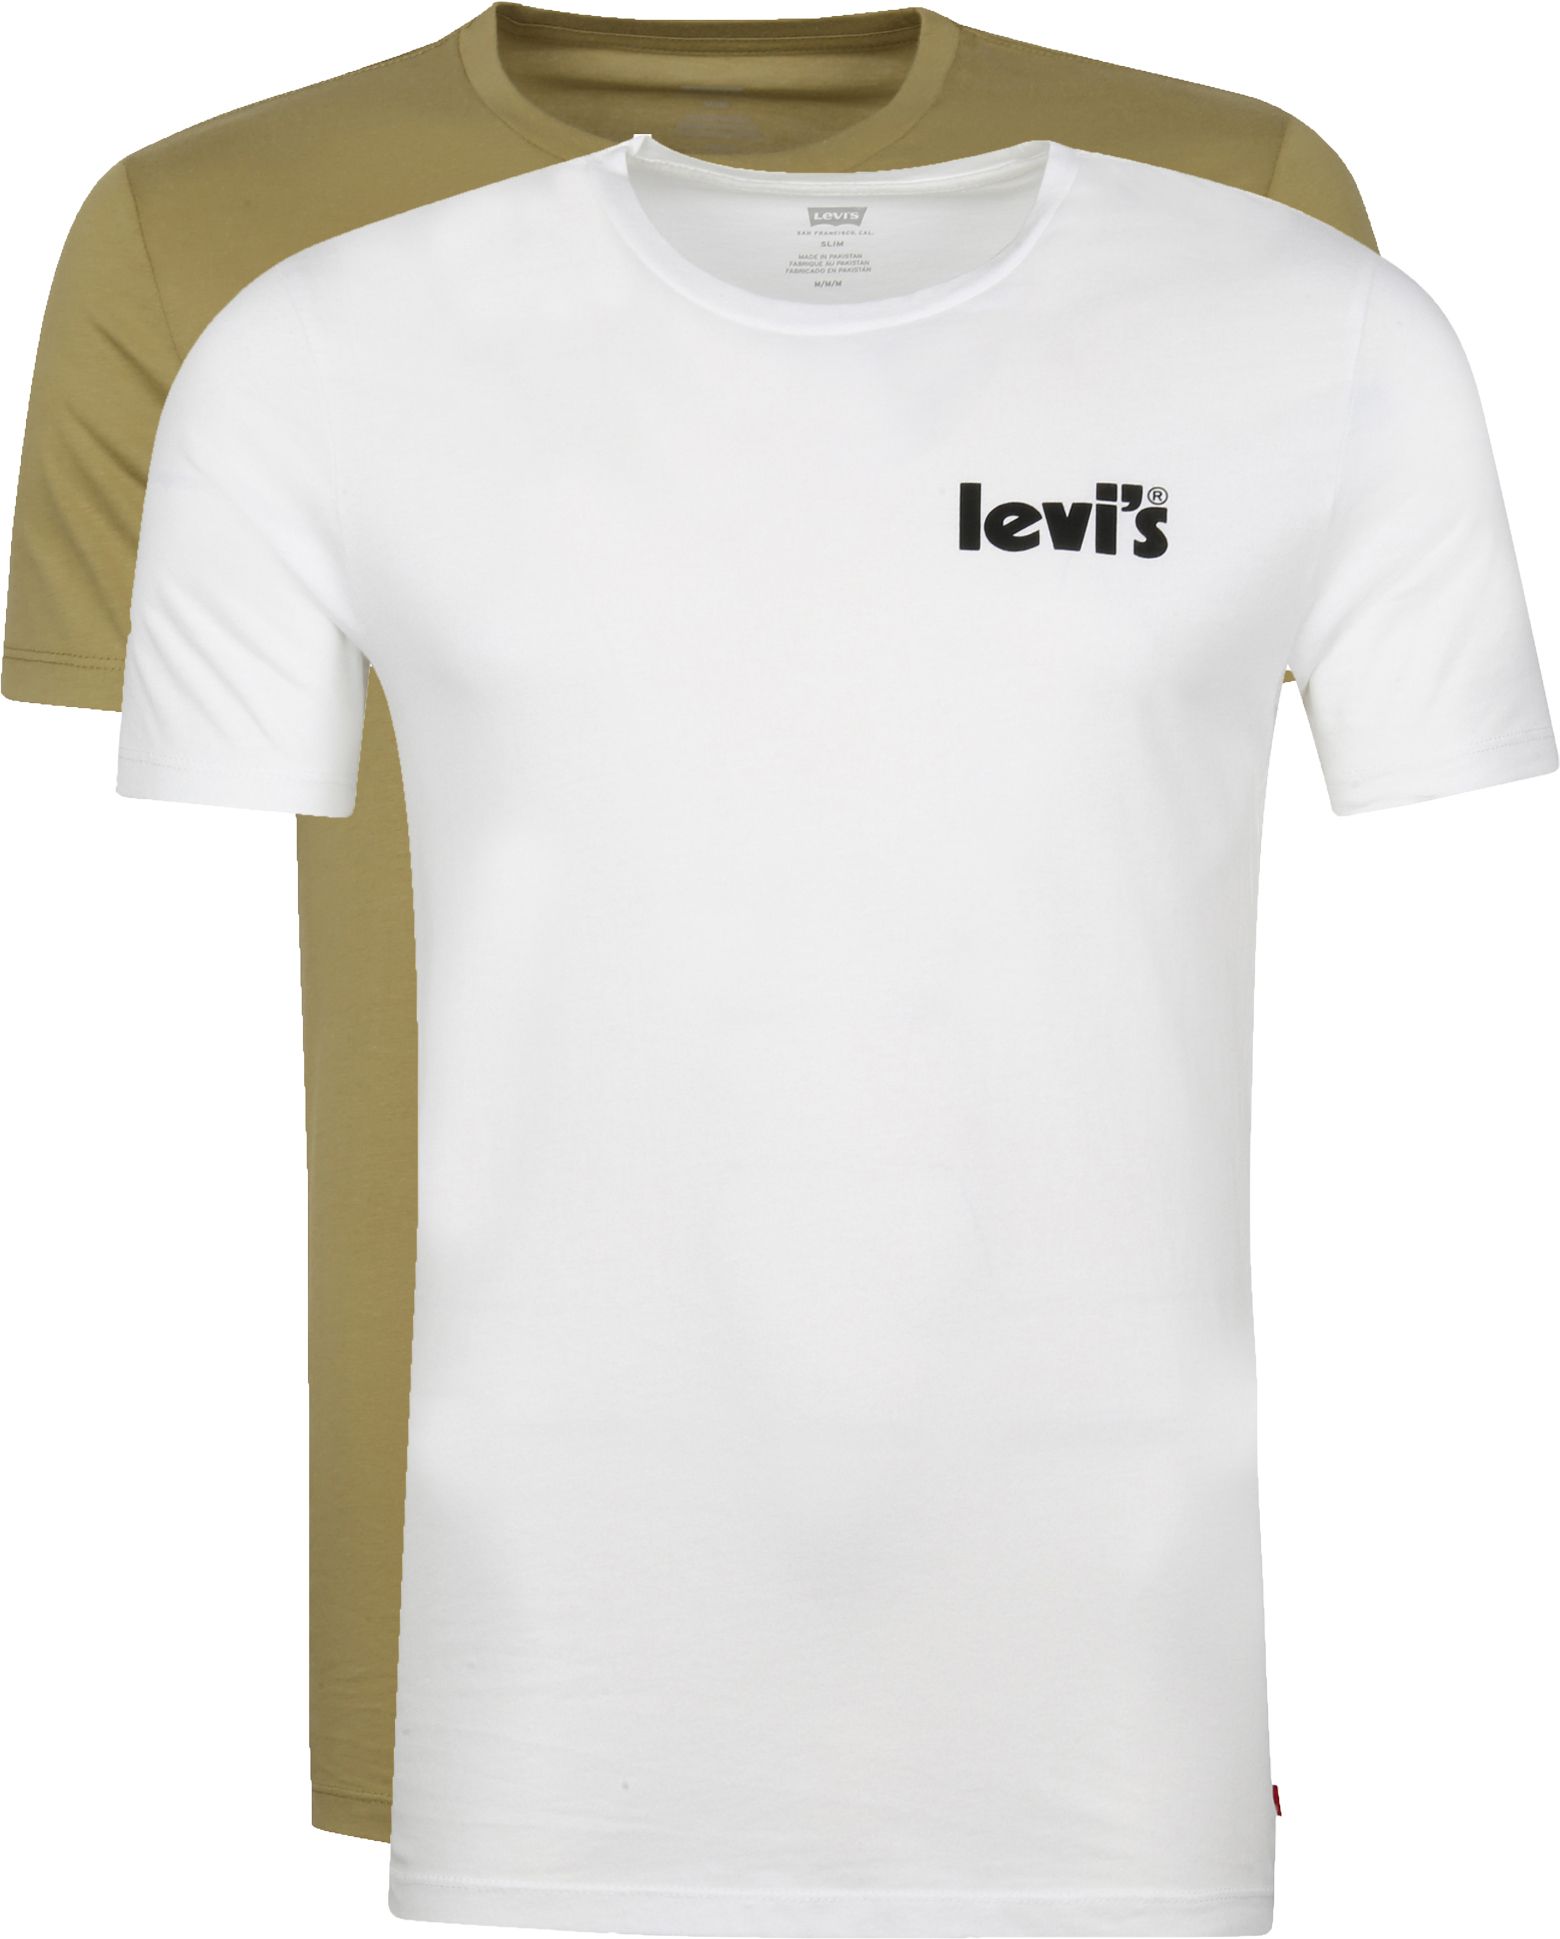 Levi's T-shirt 2-Pack White Green size M